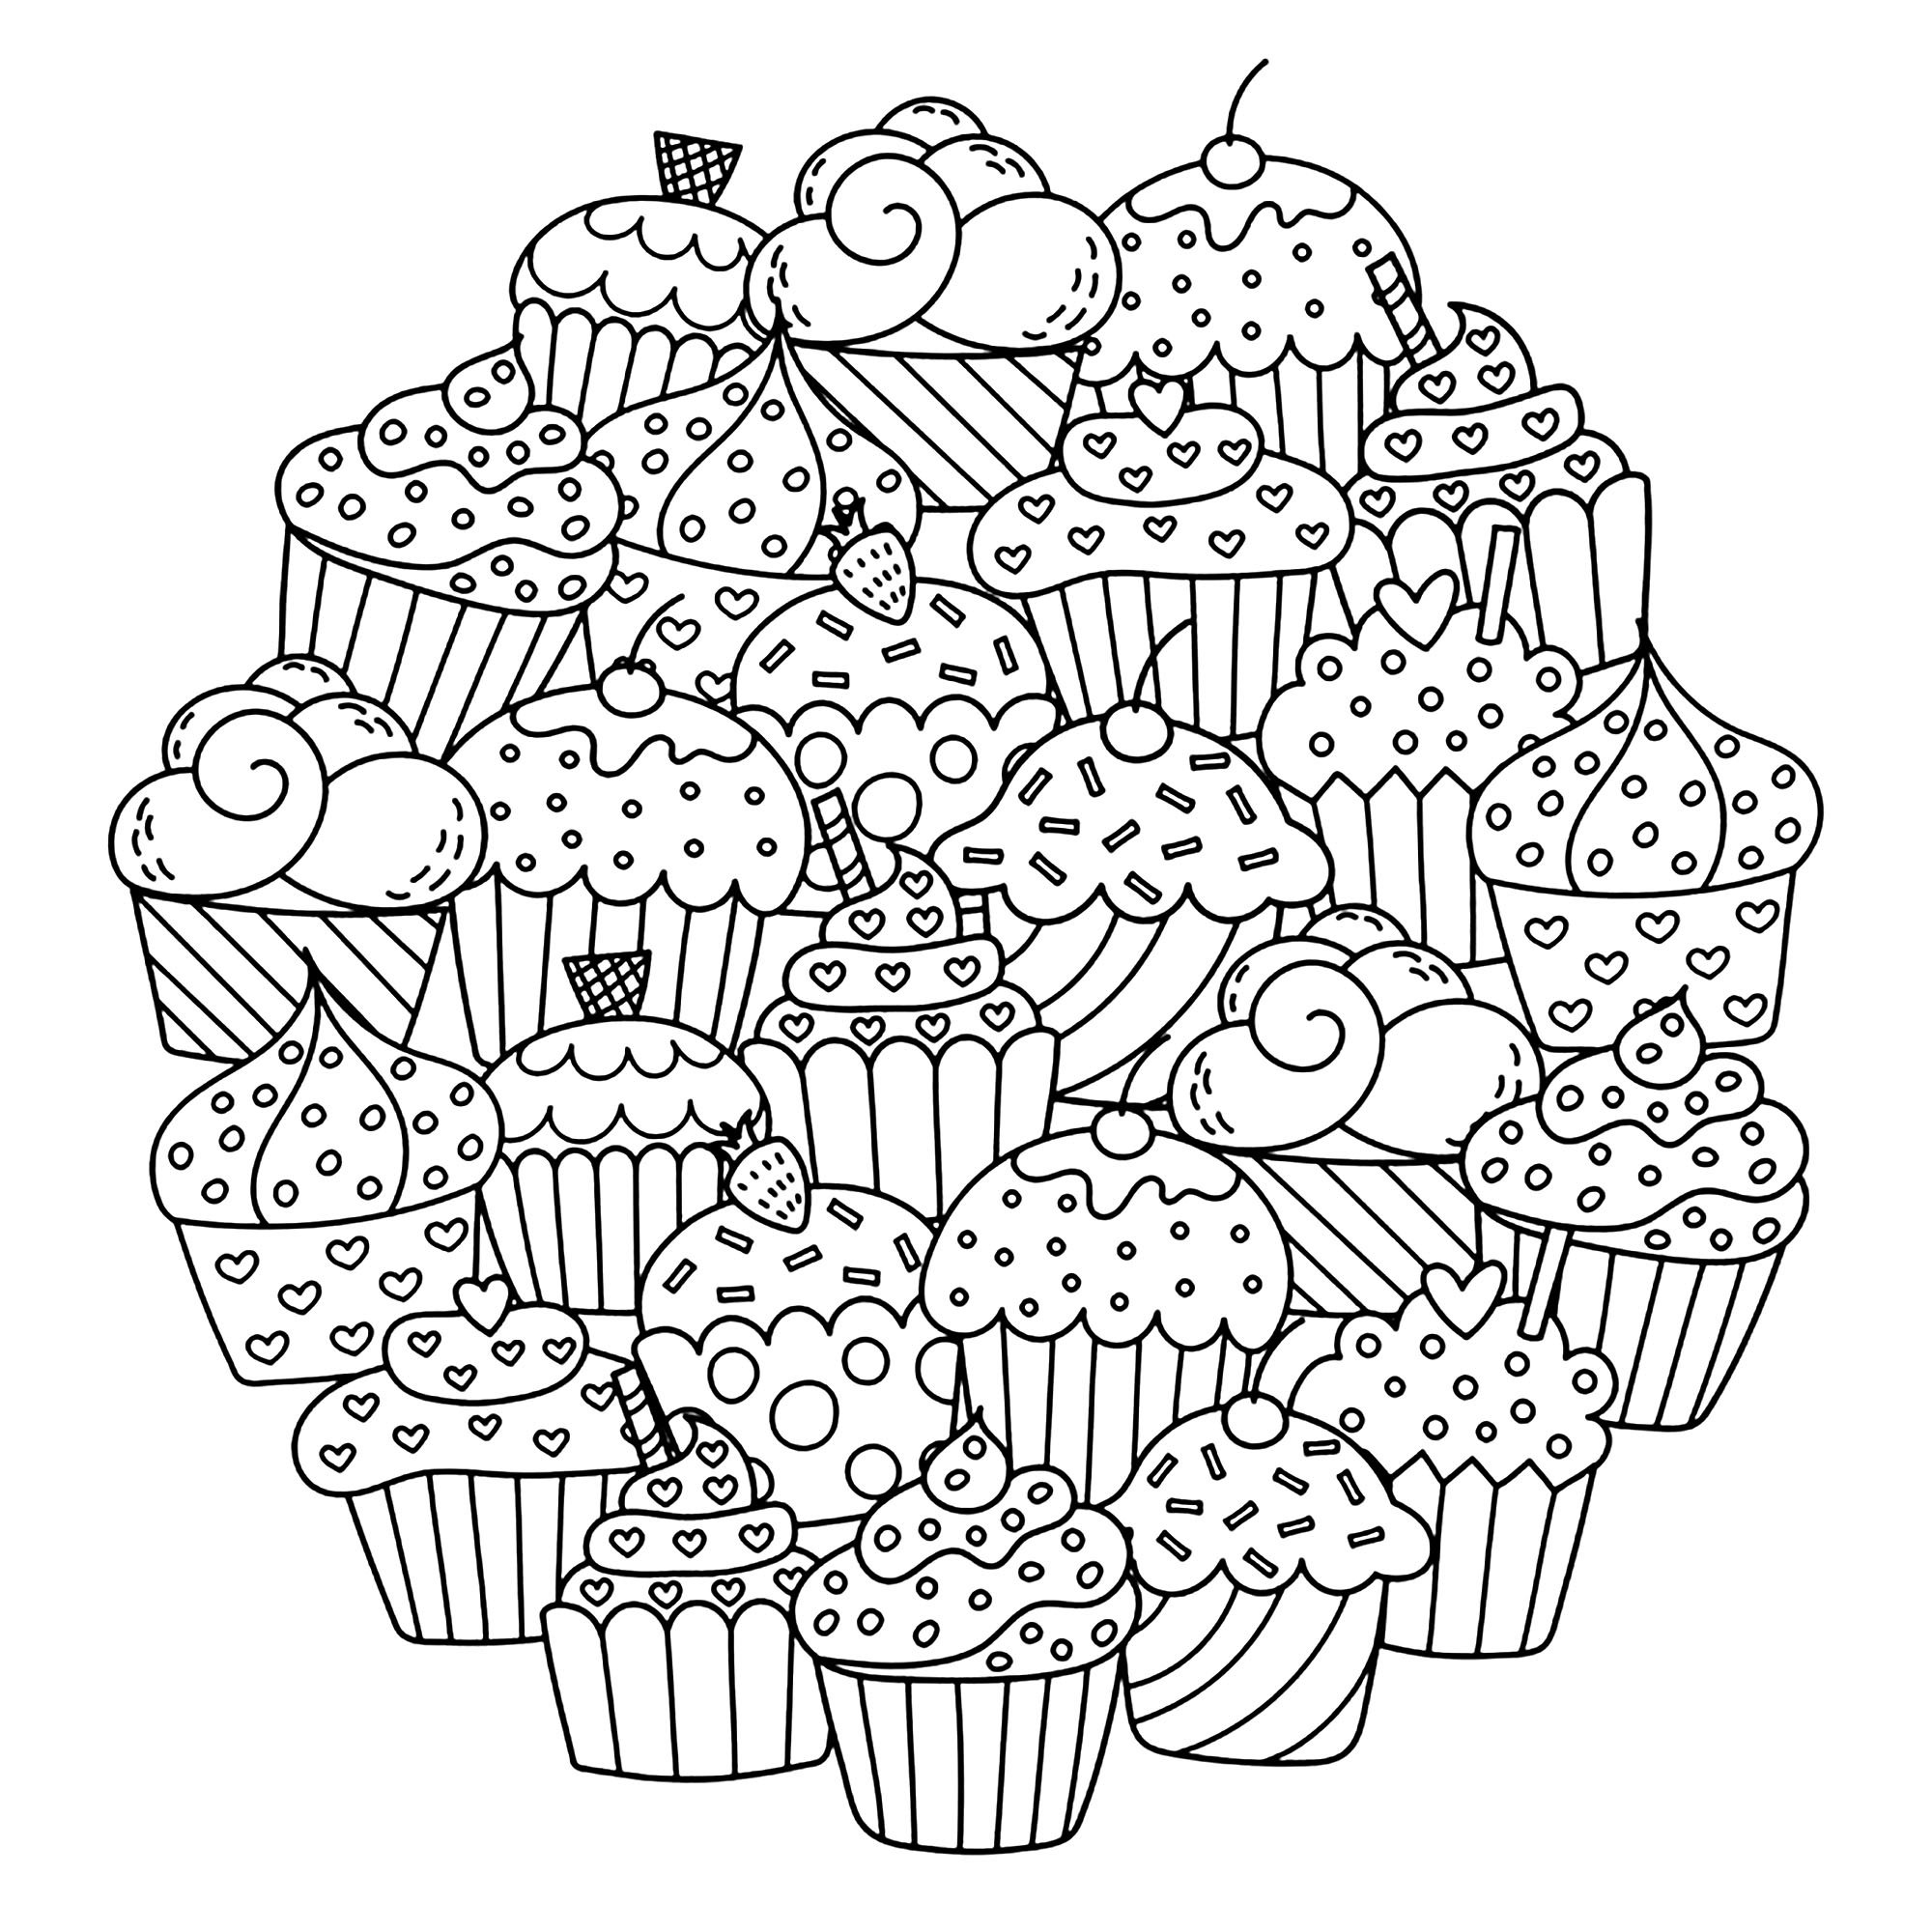 Those cute cakes are making a perfect circle to make you want to color them !, Source : 123rf   Artist : Gulnara Sabirova